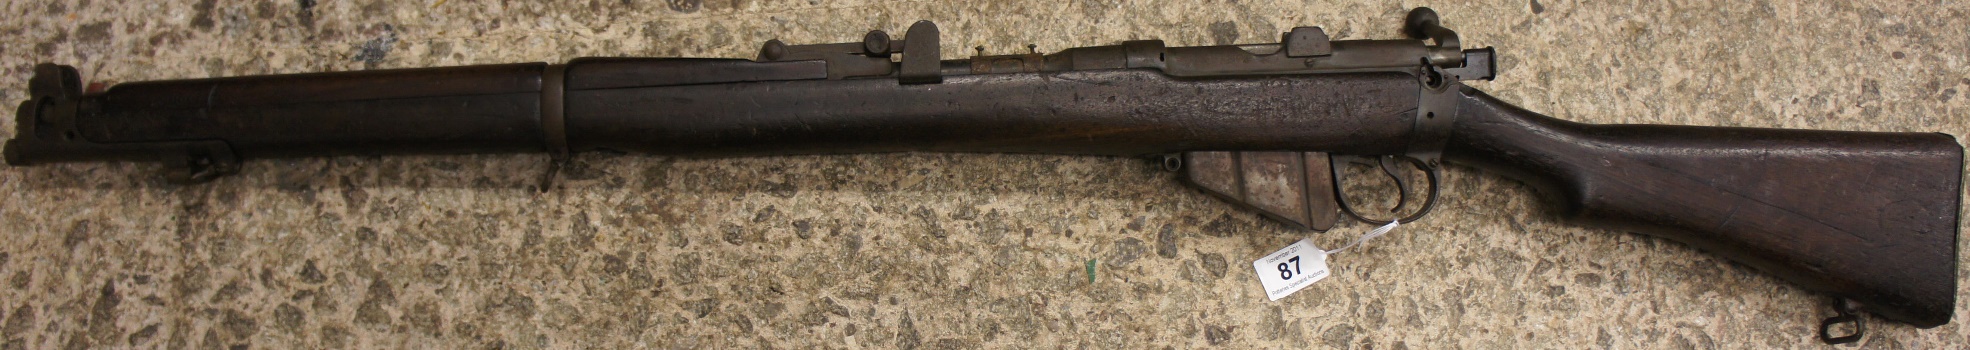 Lee Enfield SMLE Bolt Action Rifle 15919a